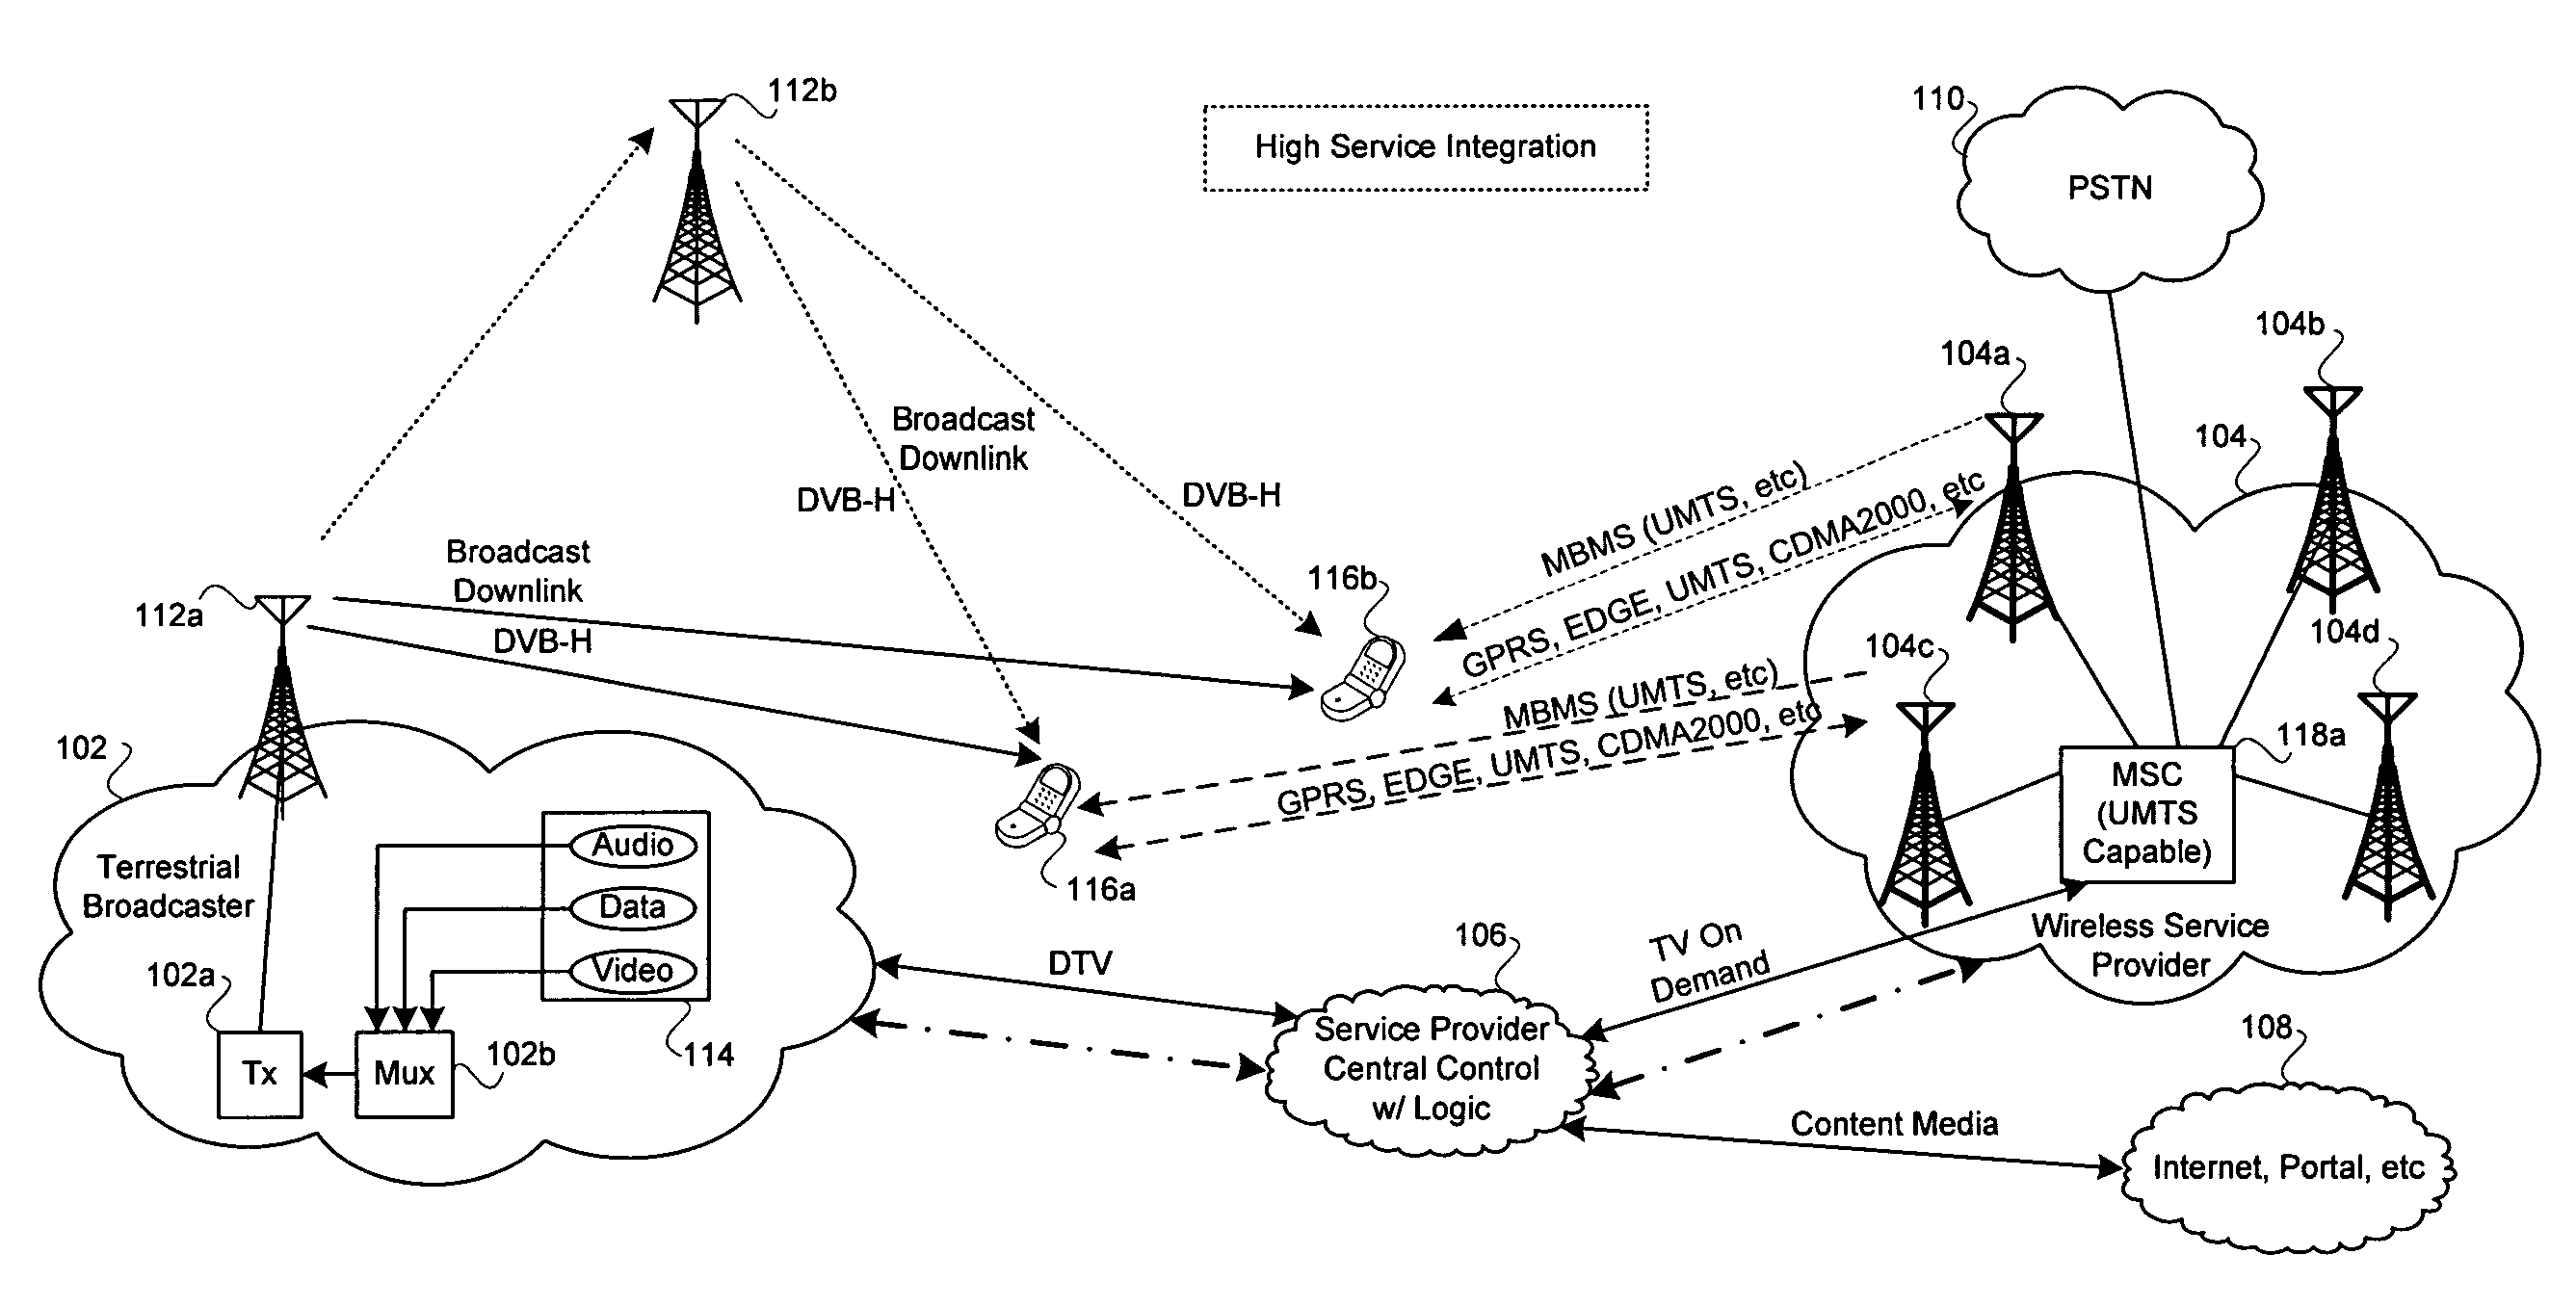 Method and system for providing broadcast services through a cellular and/or wireless network to a plurality of mobile devices via service provider integration